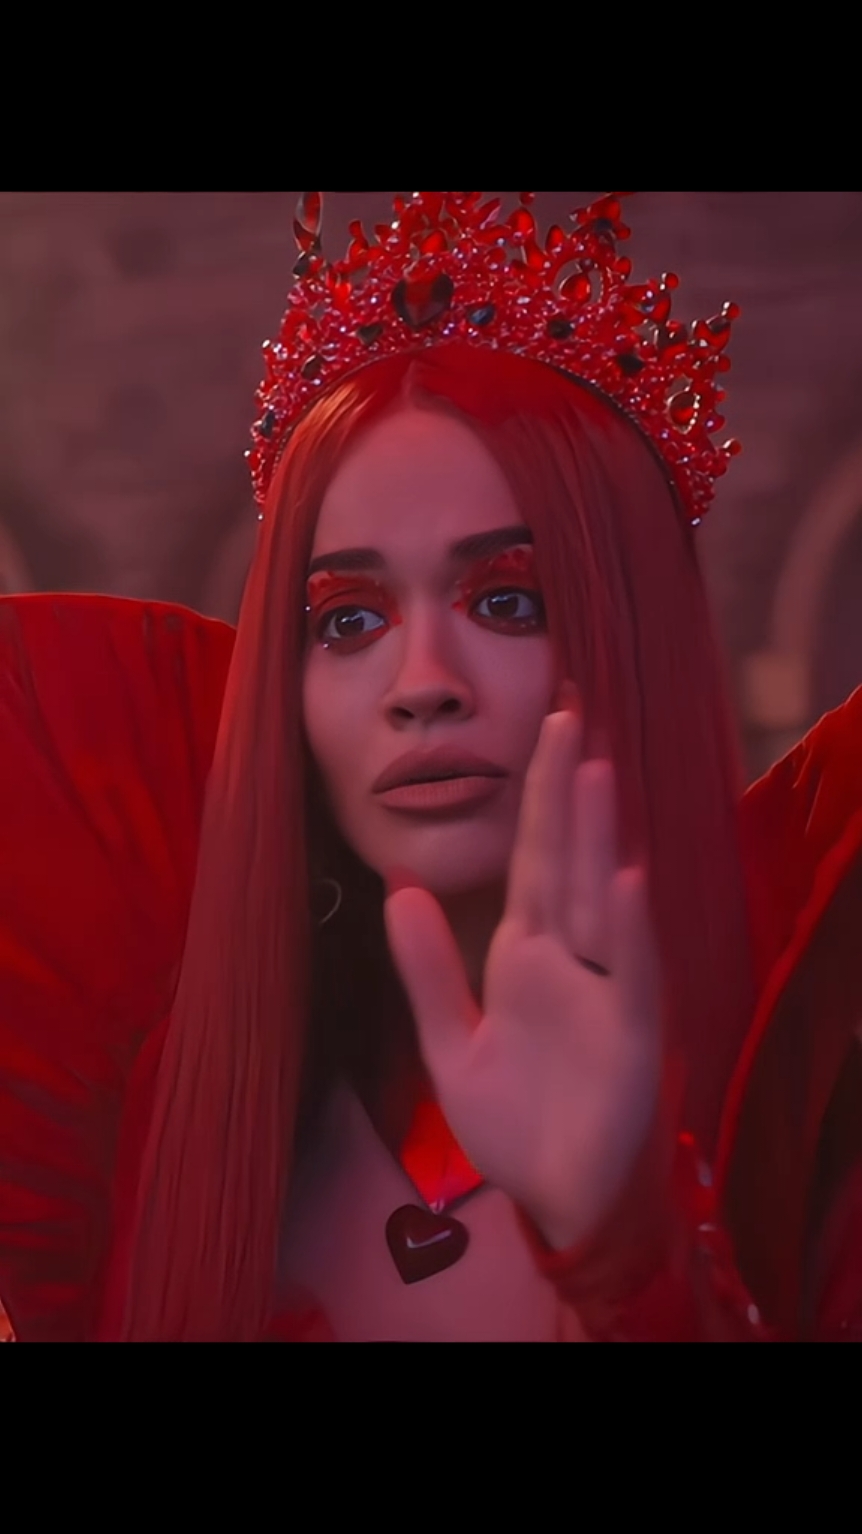 #QUEENOFHEARTS : The transitions are kinda fcked up but I don't care at this point 🤷‍♀️ || Rita Ora ate || Love ain't it || scp: @vintagesdisney or oncerpacks on Insta || #queenofhearts #ritaora #red #descendants #descendants4 #descendantstheriseofred 